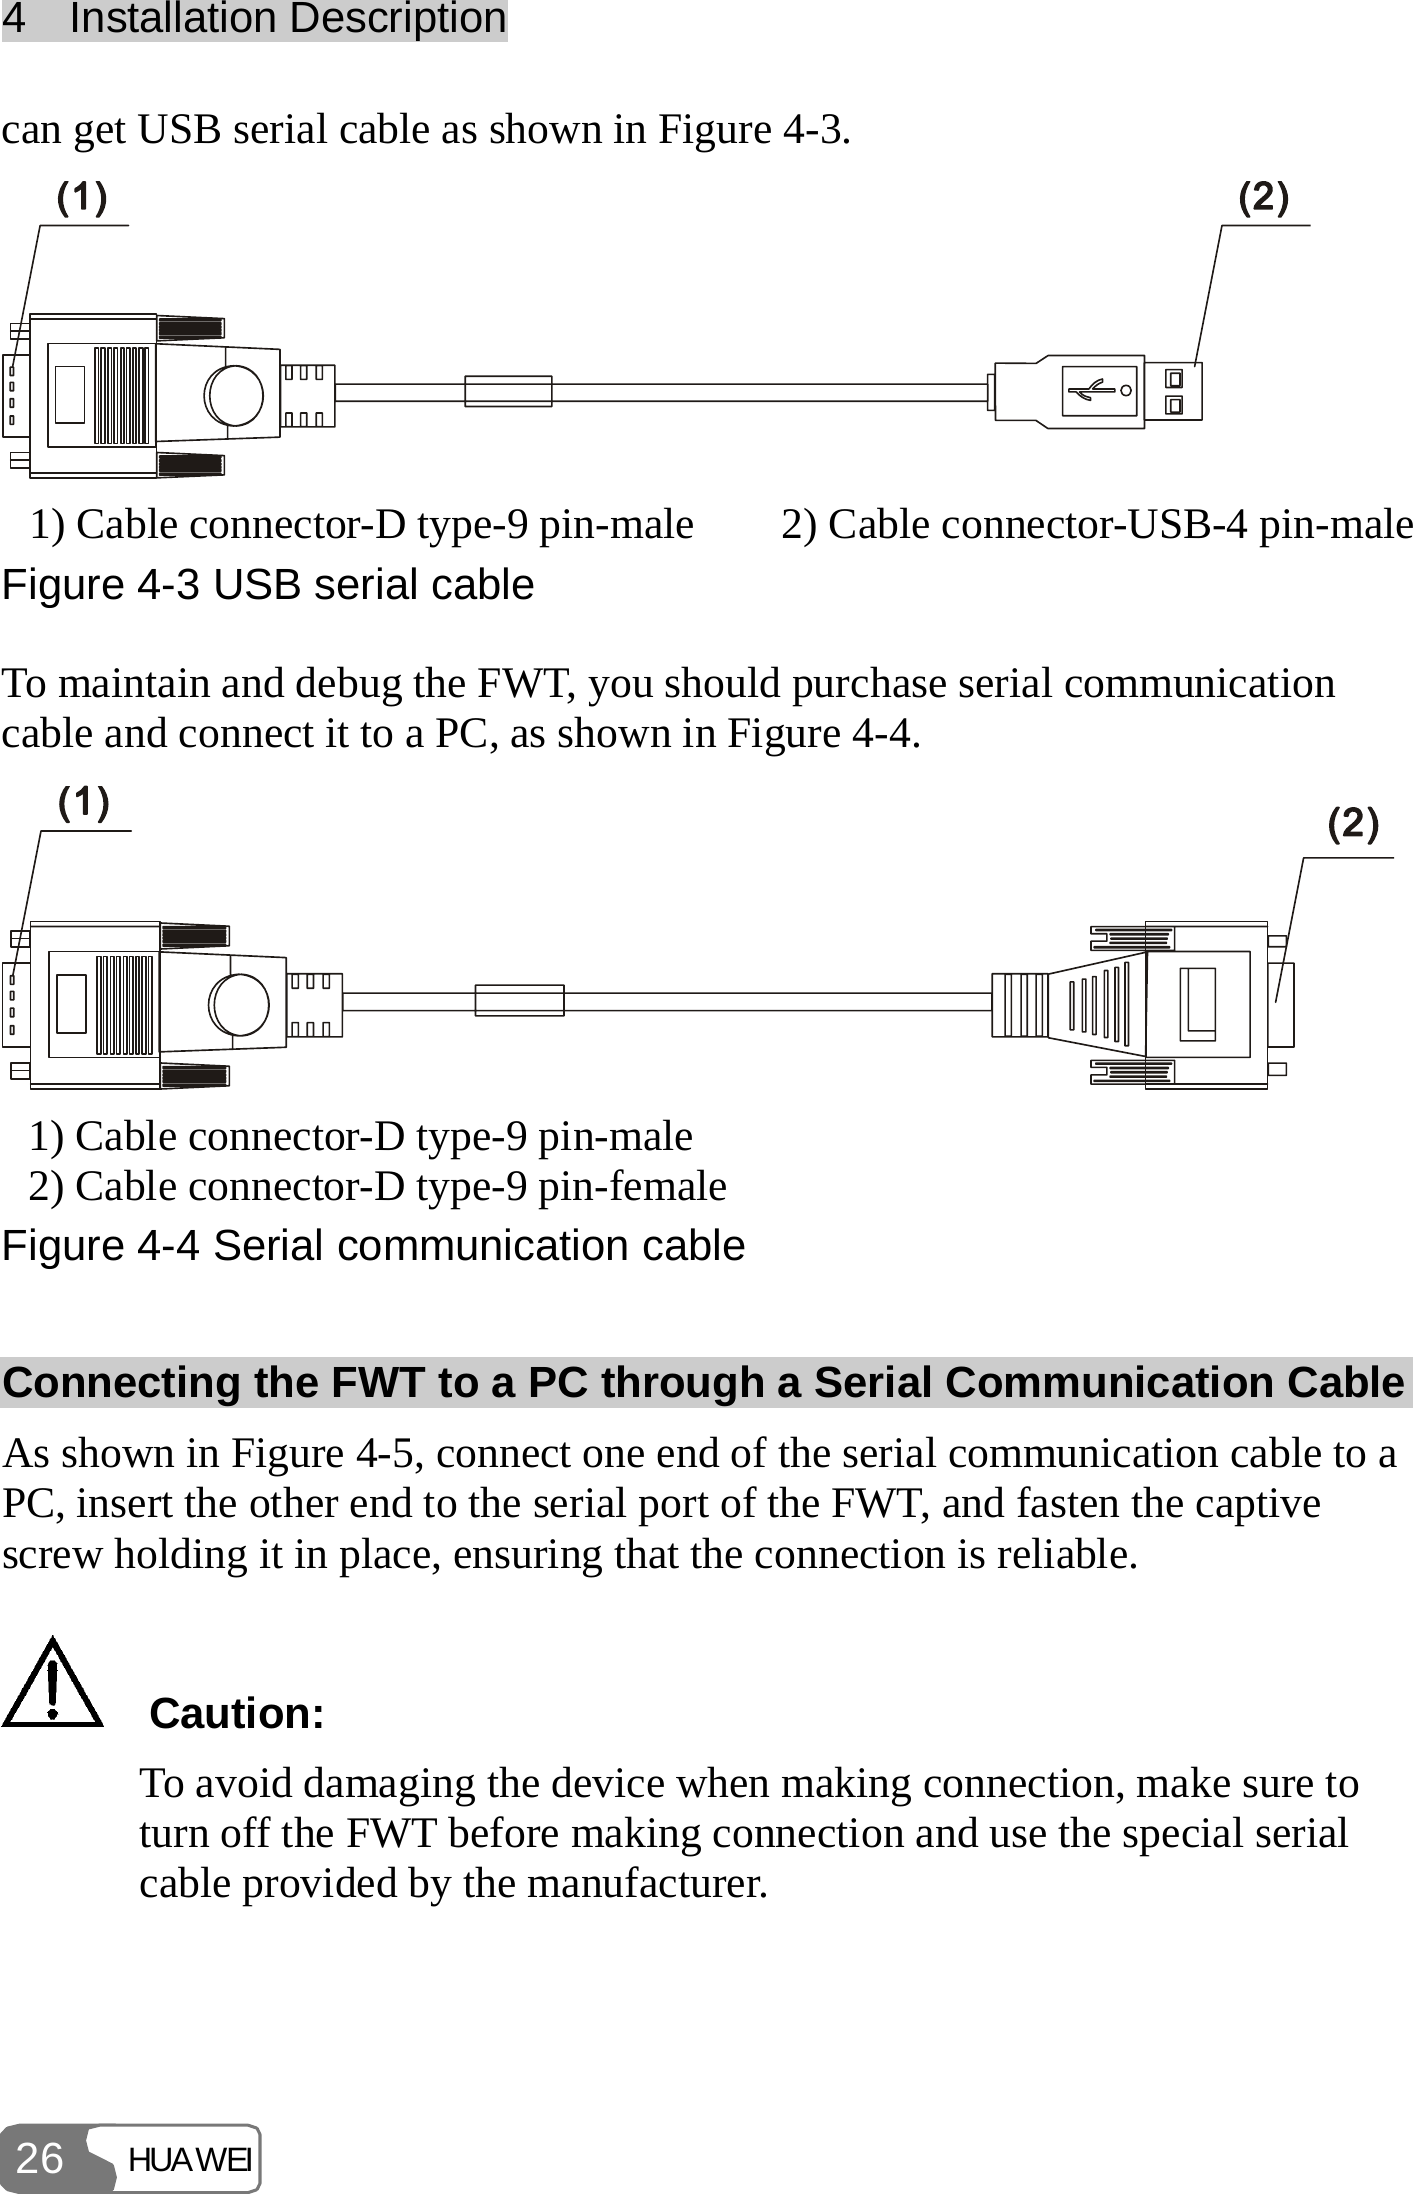 4  Installation Description HUAWEI 26 can get USB serial cable as shown in Figure 4-3.  1) Cable connector-D type-9 pin-male  2) Cable connector-USB-4 pin-maleFigure 4-3 USB serial cable To maintain and debug the FWT, you should purchase serial communication cable and connect it to a PC, as shown in Figure 4-4.  1) Cable connector-D type-9 pin-male 2) Cable connector-D type-9 pin-female Figure 4-4 Serial communication cable Connecting the FWT to a PC through a Serial Communication Cable As shown in Figure 4-5, connect one end of the serial communication cable to a PC, insert the other end to the serial port of the FWT, and fasten the captive screw holding it in place, ensuring that the connection is reliable.   Caution: To avoid damaging the device when making connection, make sure to turn off the FWT before making connection and use the special serial cable provided by the manufacturer.  